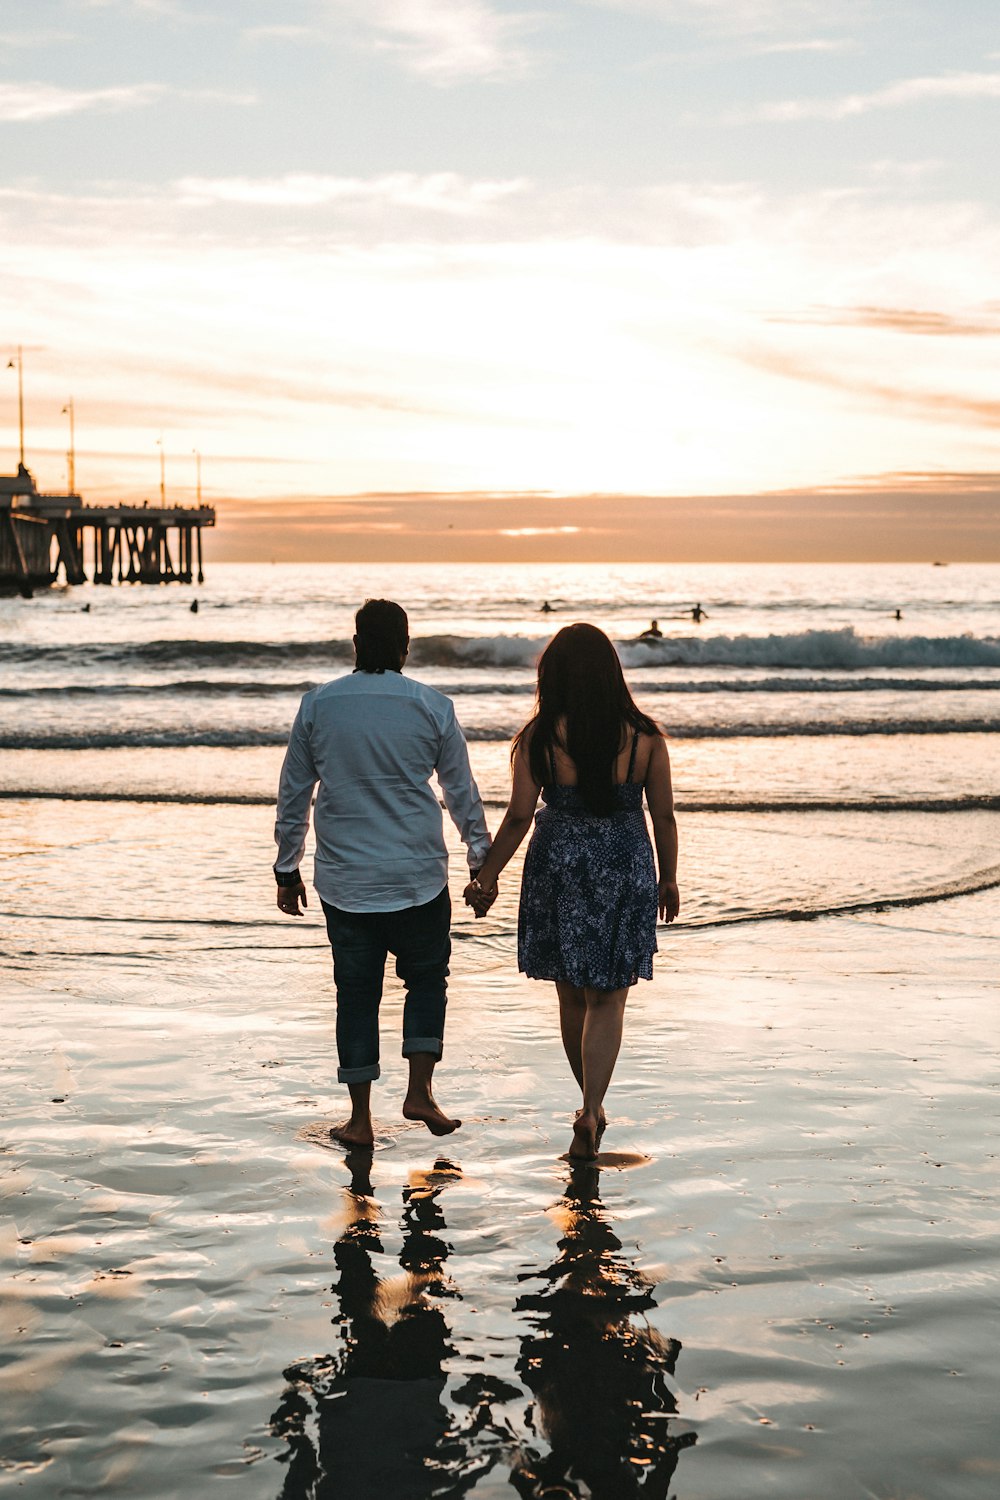 man and woman holding hands each other while walking on seashore during daytime